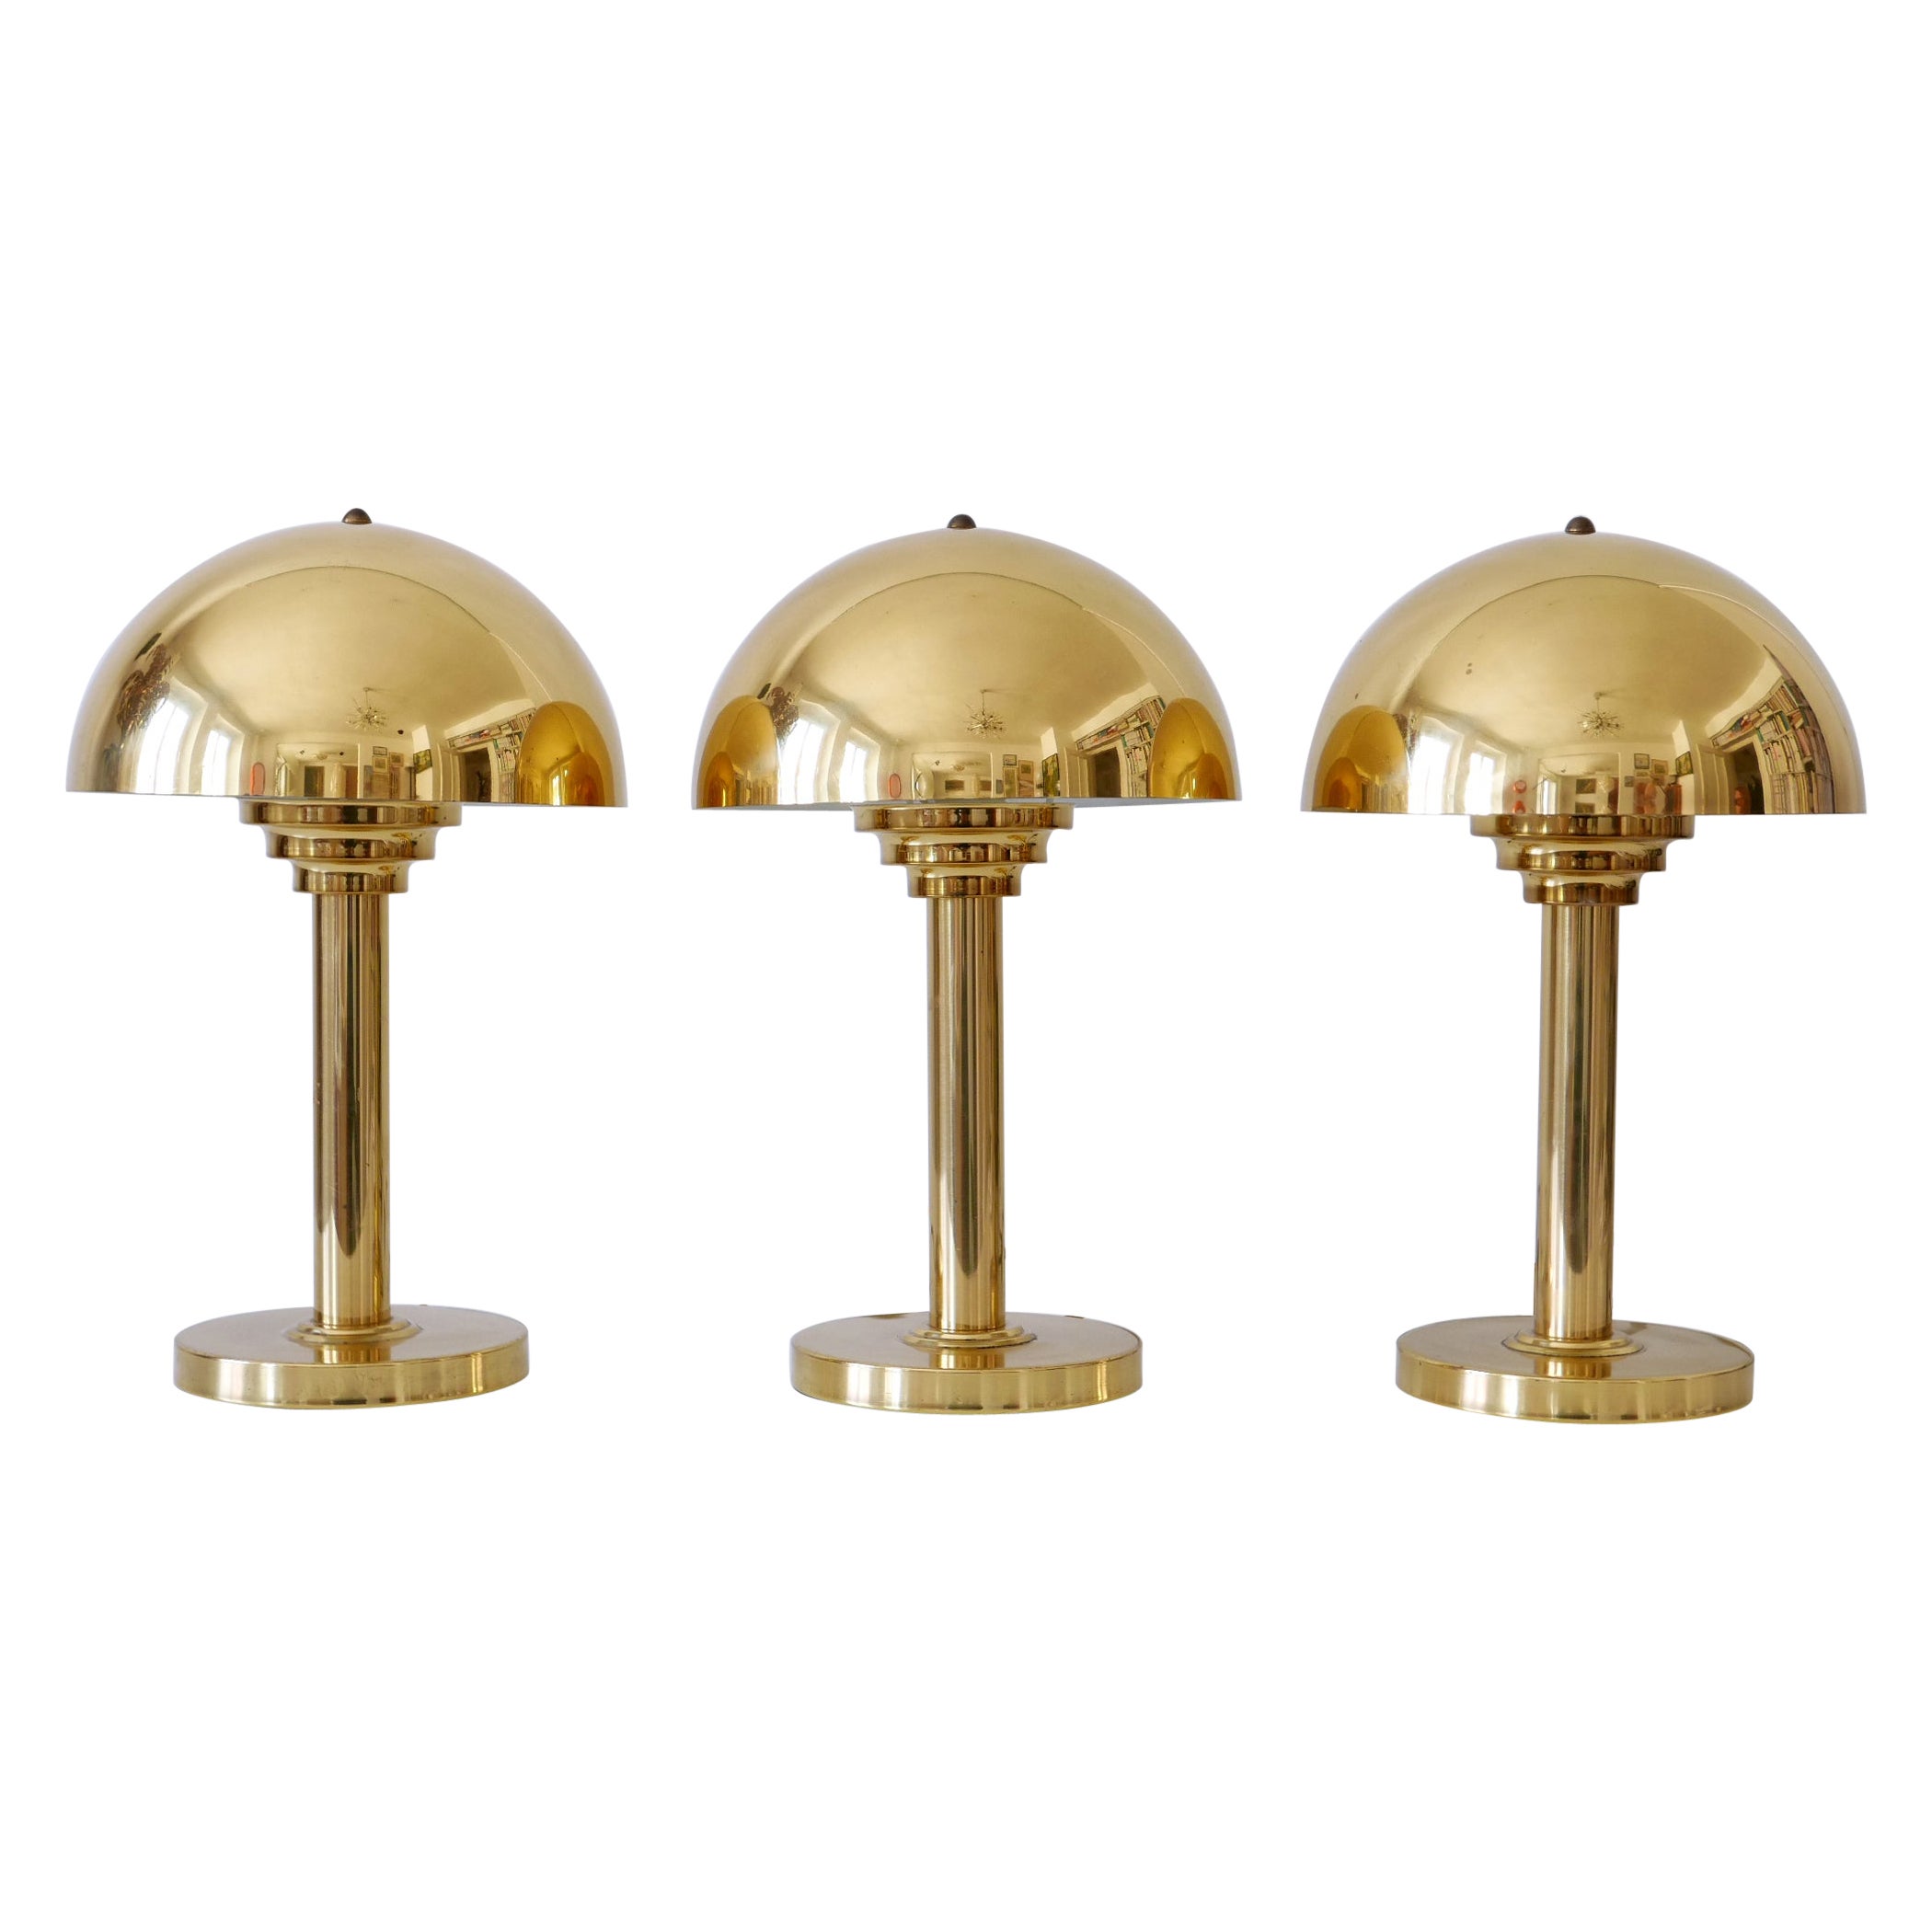 Elegant Mid-Century Modern Brass Table Lamps by WSB, Germany, 1960s For Sale